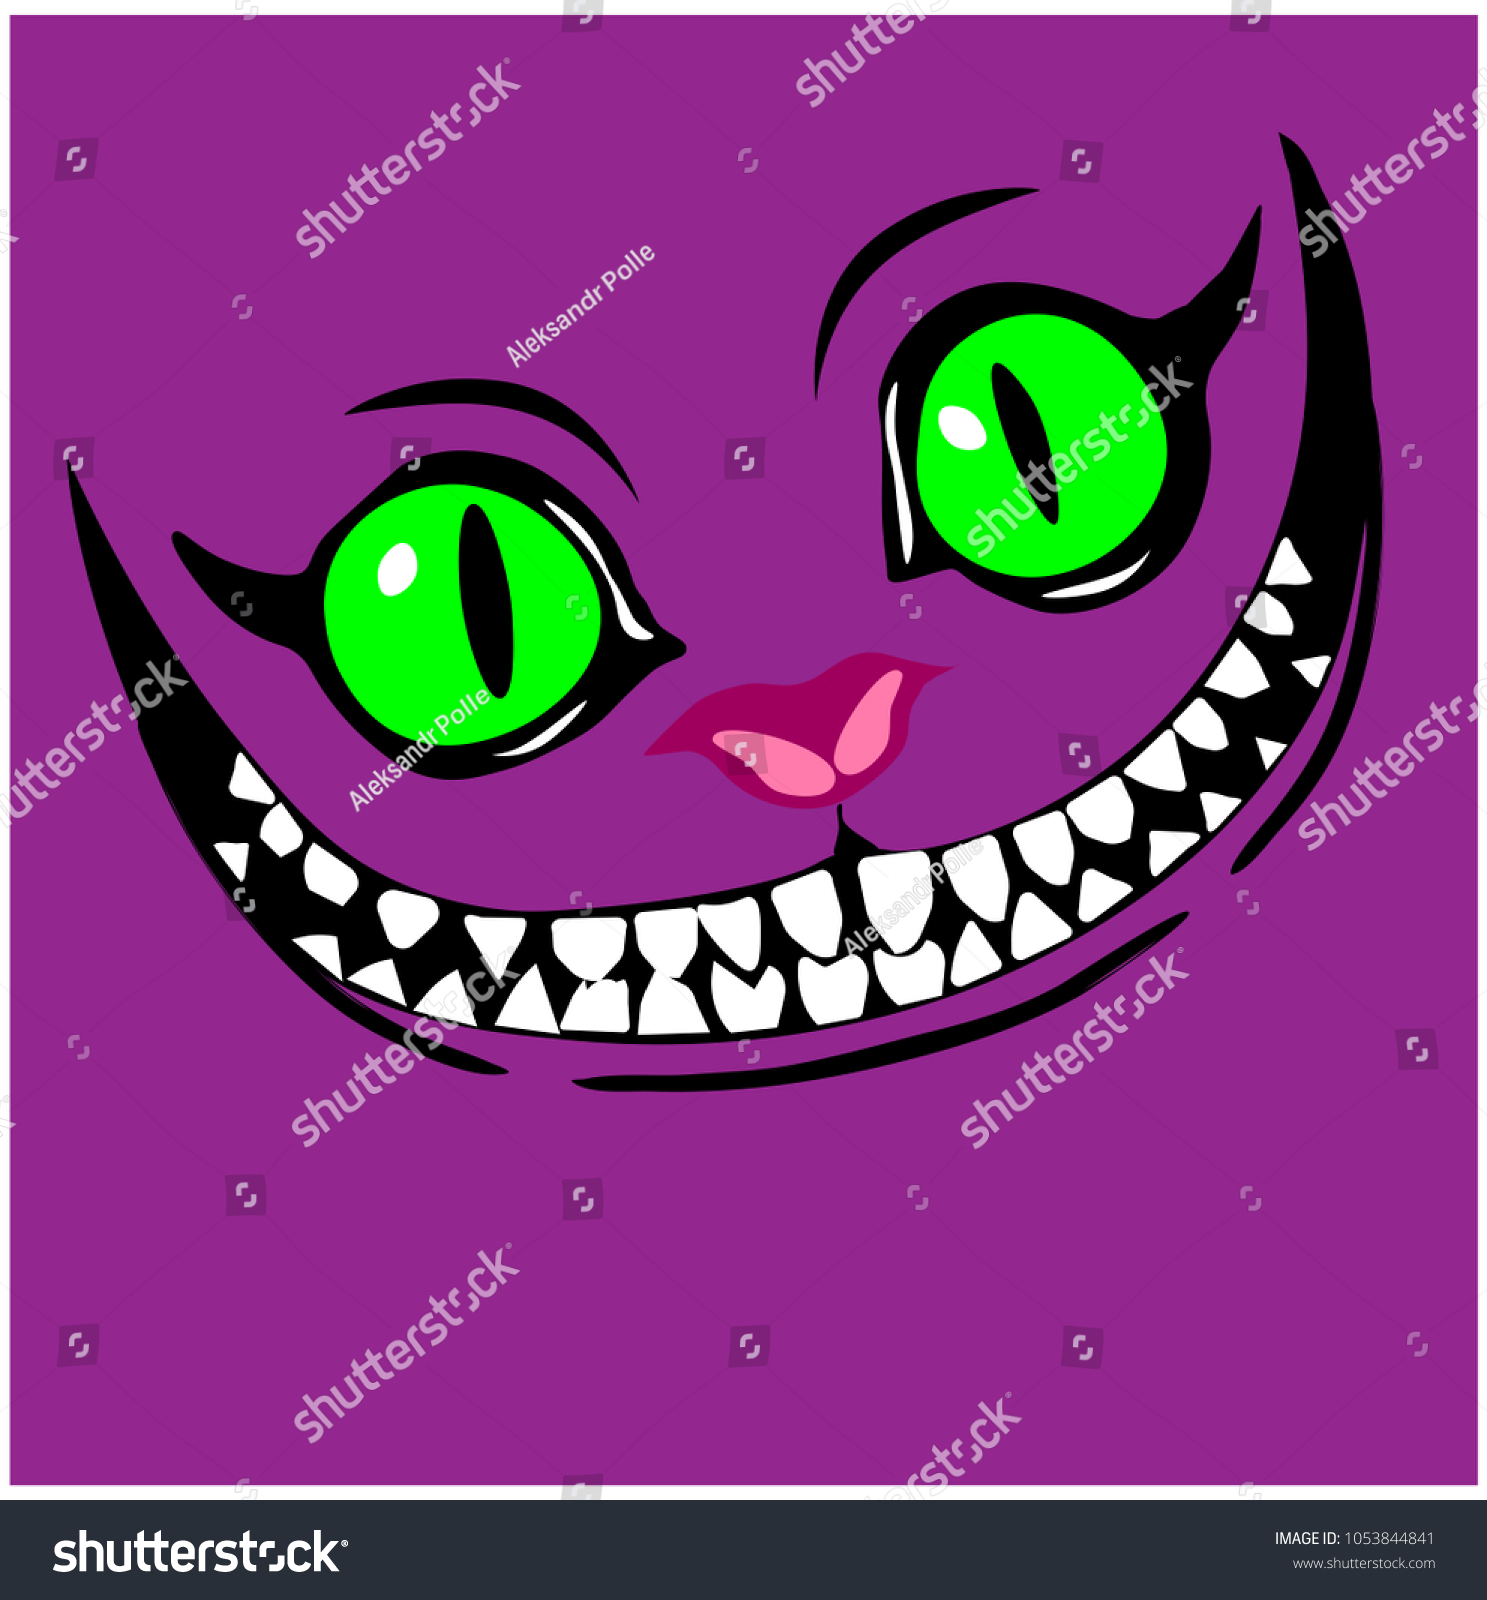 SVG of Smiling Cheshire cat color pattern svg